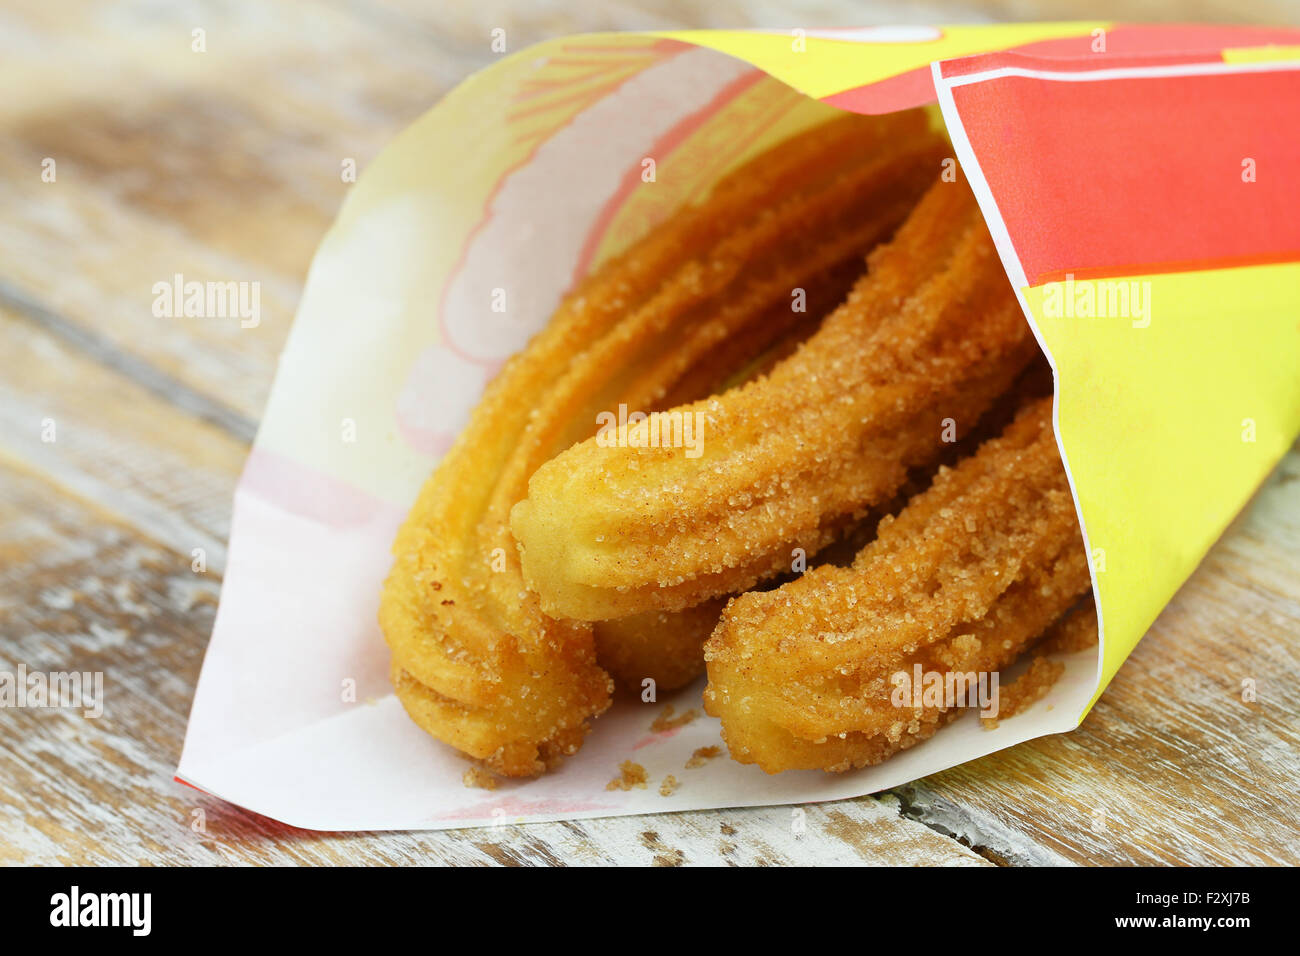 Spanish churros in paper bag on rustic wooden surface, closeup Stock Photo